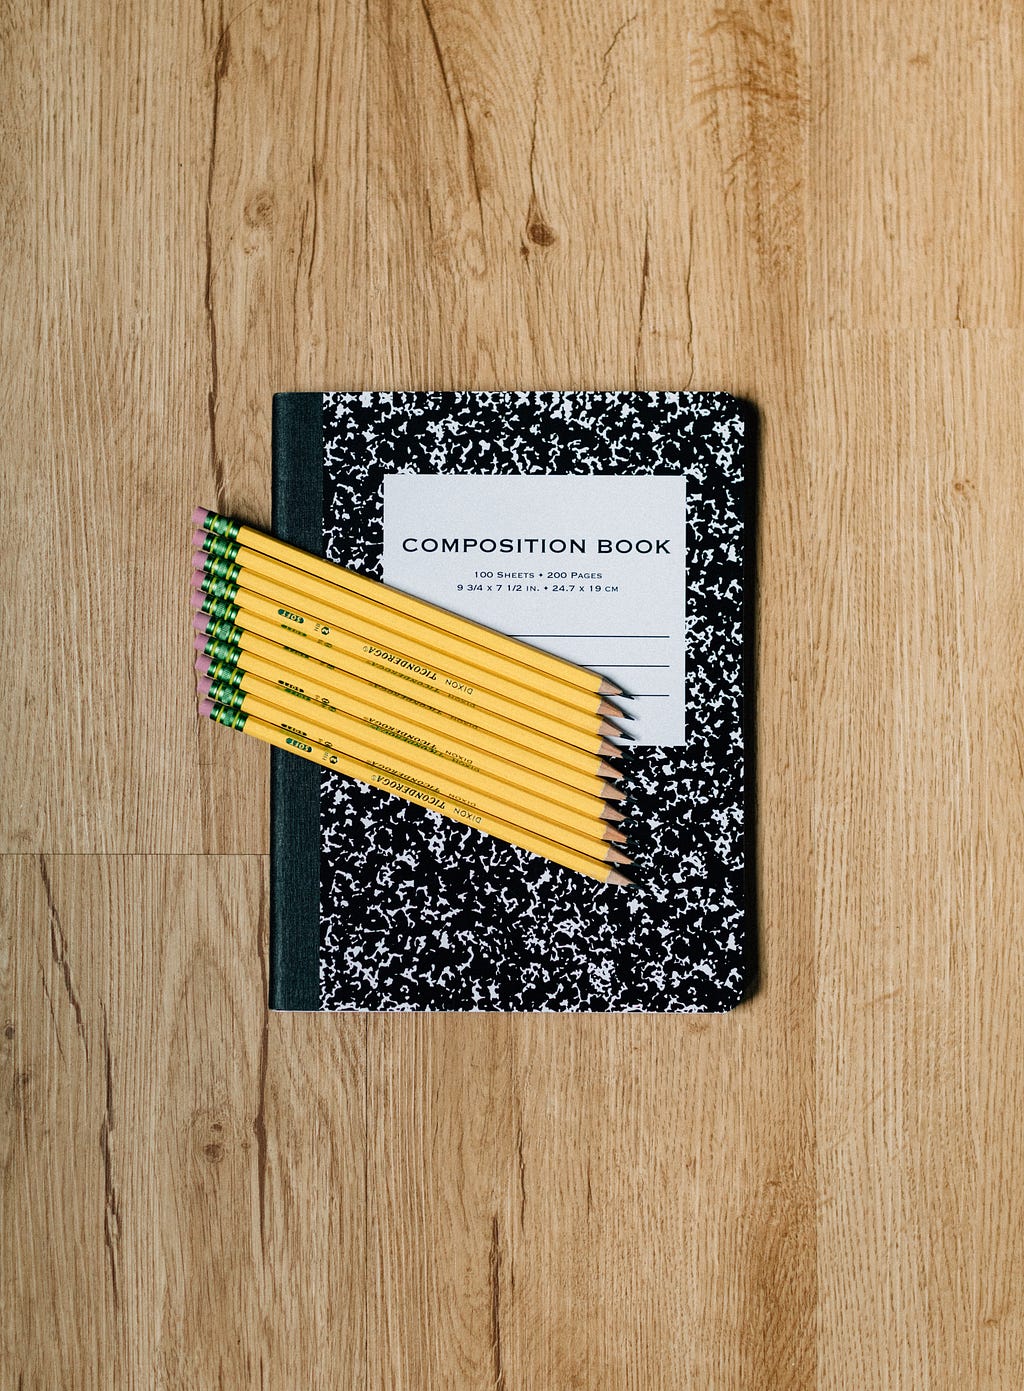 A composition book with pencils